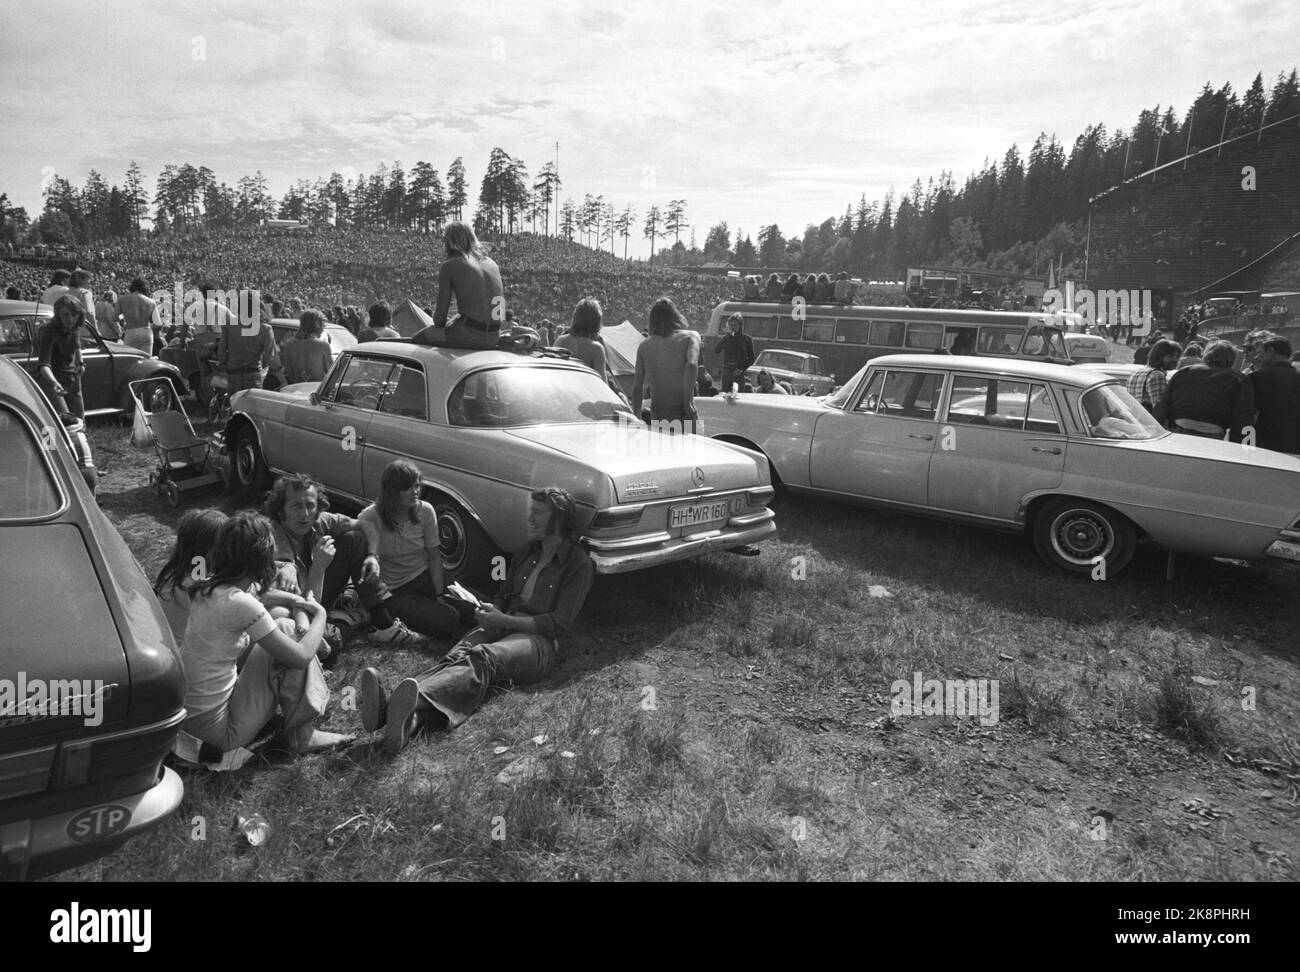 Oslo June 17, 1973. Rock concert in Holmenkollen, the Ragnarock event under the auspices of Centralfilm A/S was a great success. The event took place from 1300 until midnight. The first group out was the Bergen Group Saft in interaction with Hardangerfler Sigbjørn Bernhoft Osa. The tickets cost NOK 20 and a movie from the event is scheduled to be shown 3-4 months after the concert. Photo: Current / NTB Stock Photo